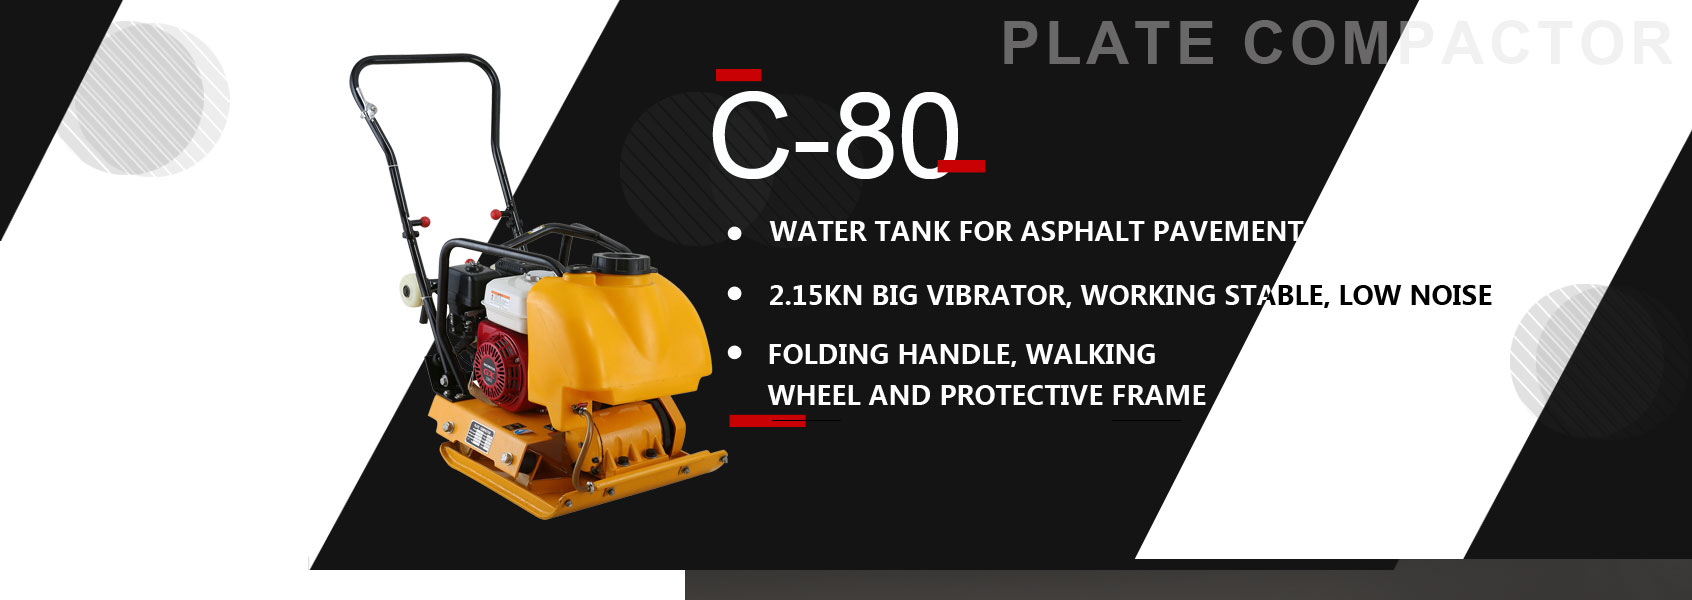 Construction compactor plate machine Soil 5.5 HP plate compactor road build bridge using factory direct sale with water tank